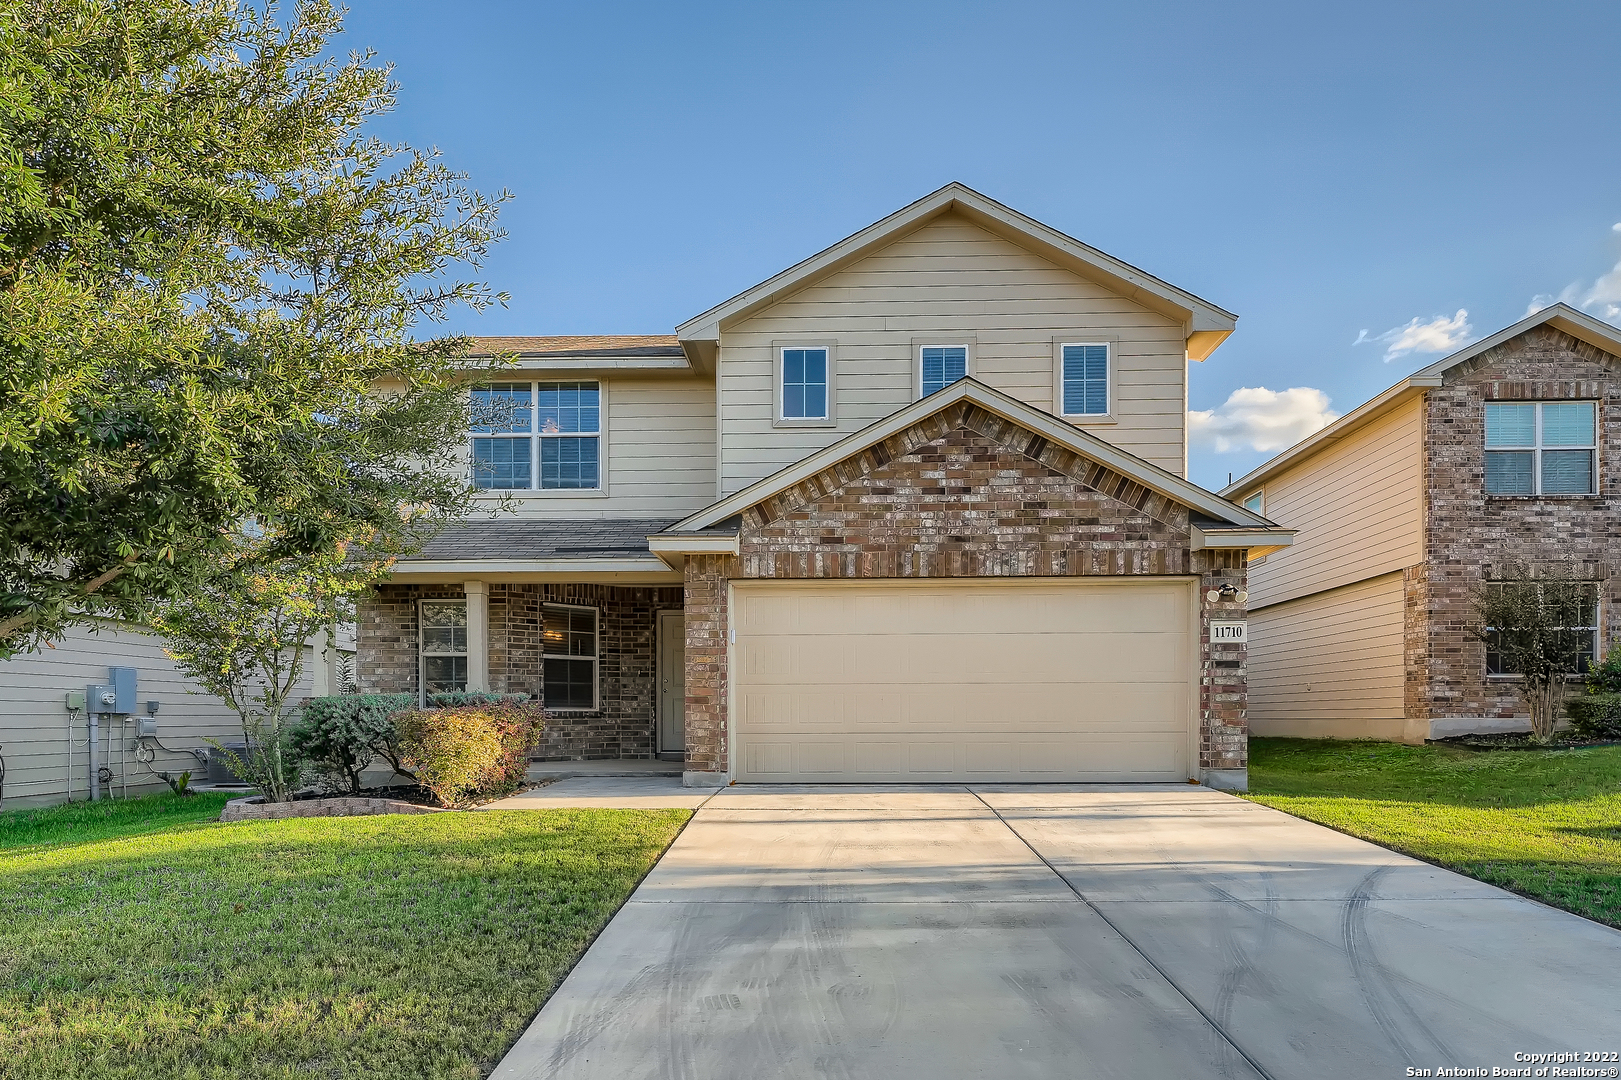 Click the Virtual Tour link to view the 3D Tour. This lovely two story home just minutes from Lackland AFB and less than 30 minutes from downtown boasts more than 2300 sqft and less than 10 years old. As you walk in notice the separate dining room that has a great view of the manicured front yard. Continuing into a wide open floor plan is the modern kitchen that opens up beautifully to the spacious living room. The tiled backsplash matches beautifully with the granite counter tops as well as the spacious breakfast bar. The large living room boasts high ceilings giving off a airy atmosphere. High ceilings continue into the large primary bedroom that is located on the first floor away from the other three secondary bedrooms to provide extra privacy. The primary ensuite provides a huge walk-in closet and lovely soaking tub and separate walk-in shower. All secondary bedrooms have easy access to the loft area upstairs that provides an extra living space for new home owners to make their own! The easy to maintain fenced-in backyard provides an easy to take care of leveled green space, storage shed and lovely covered patio. New home owners will also get to enjoy no backyard neighbors!